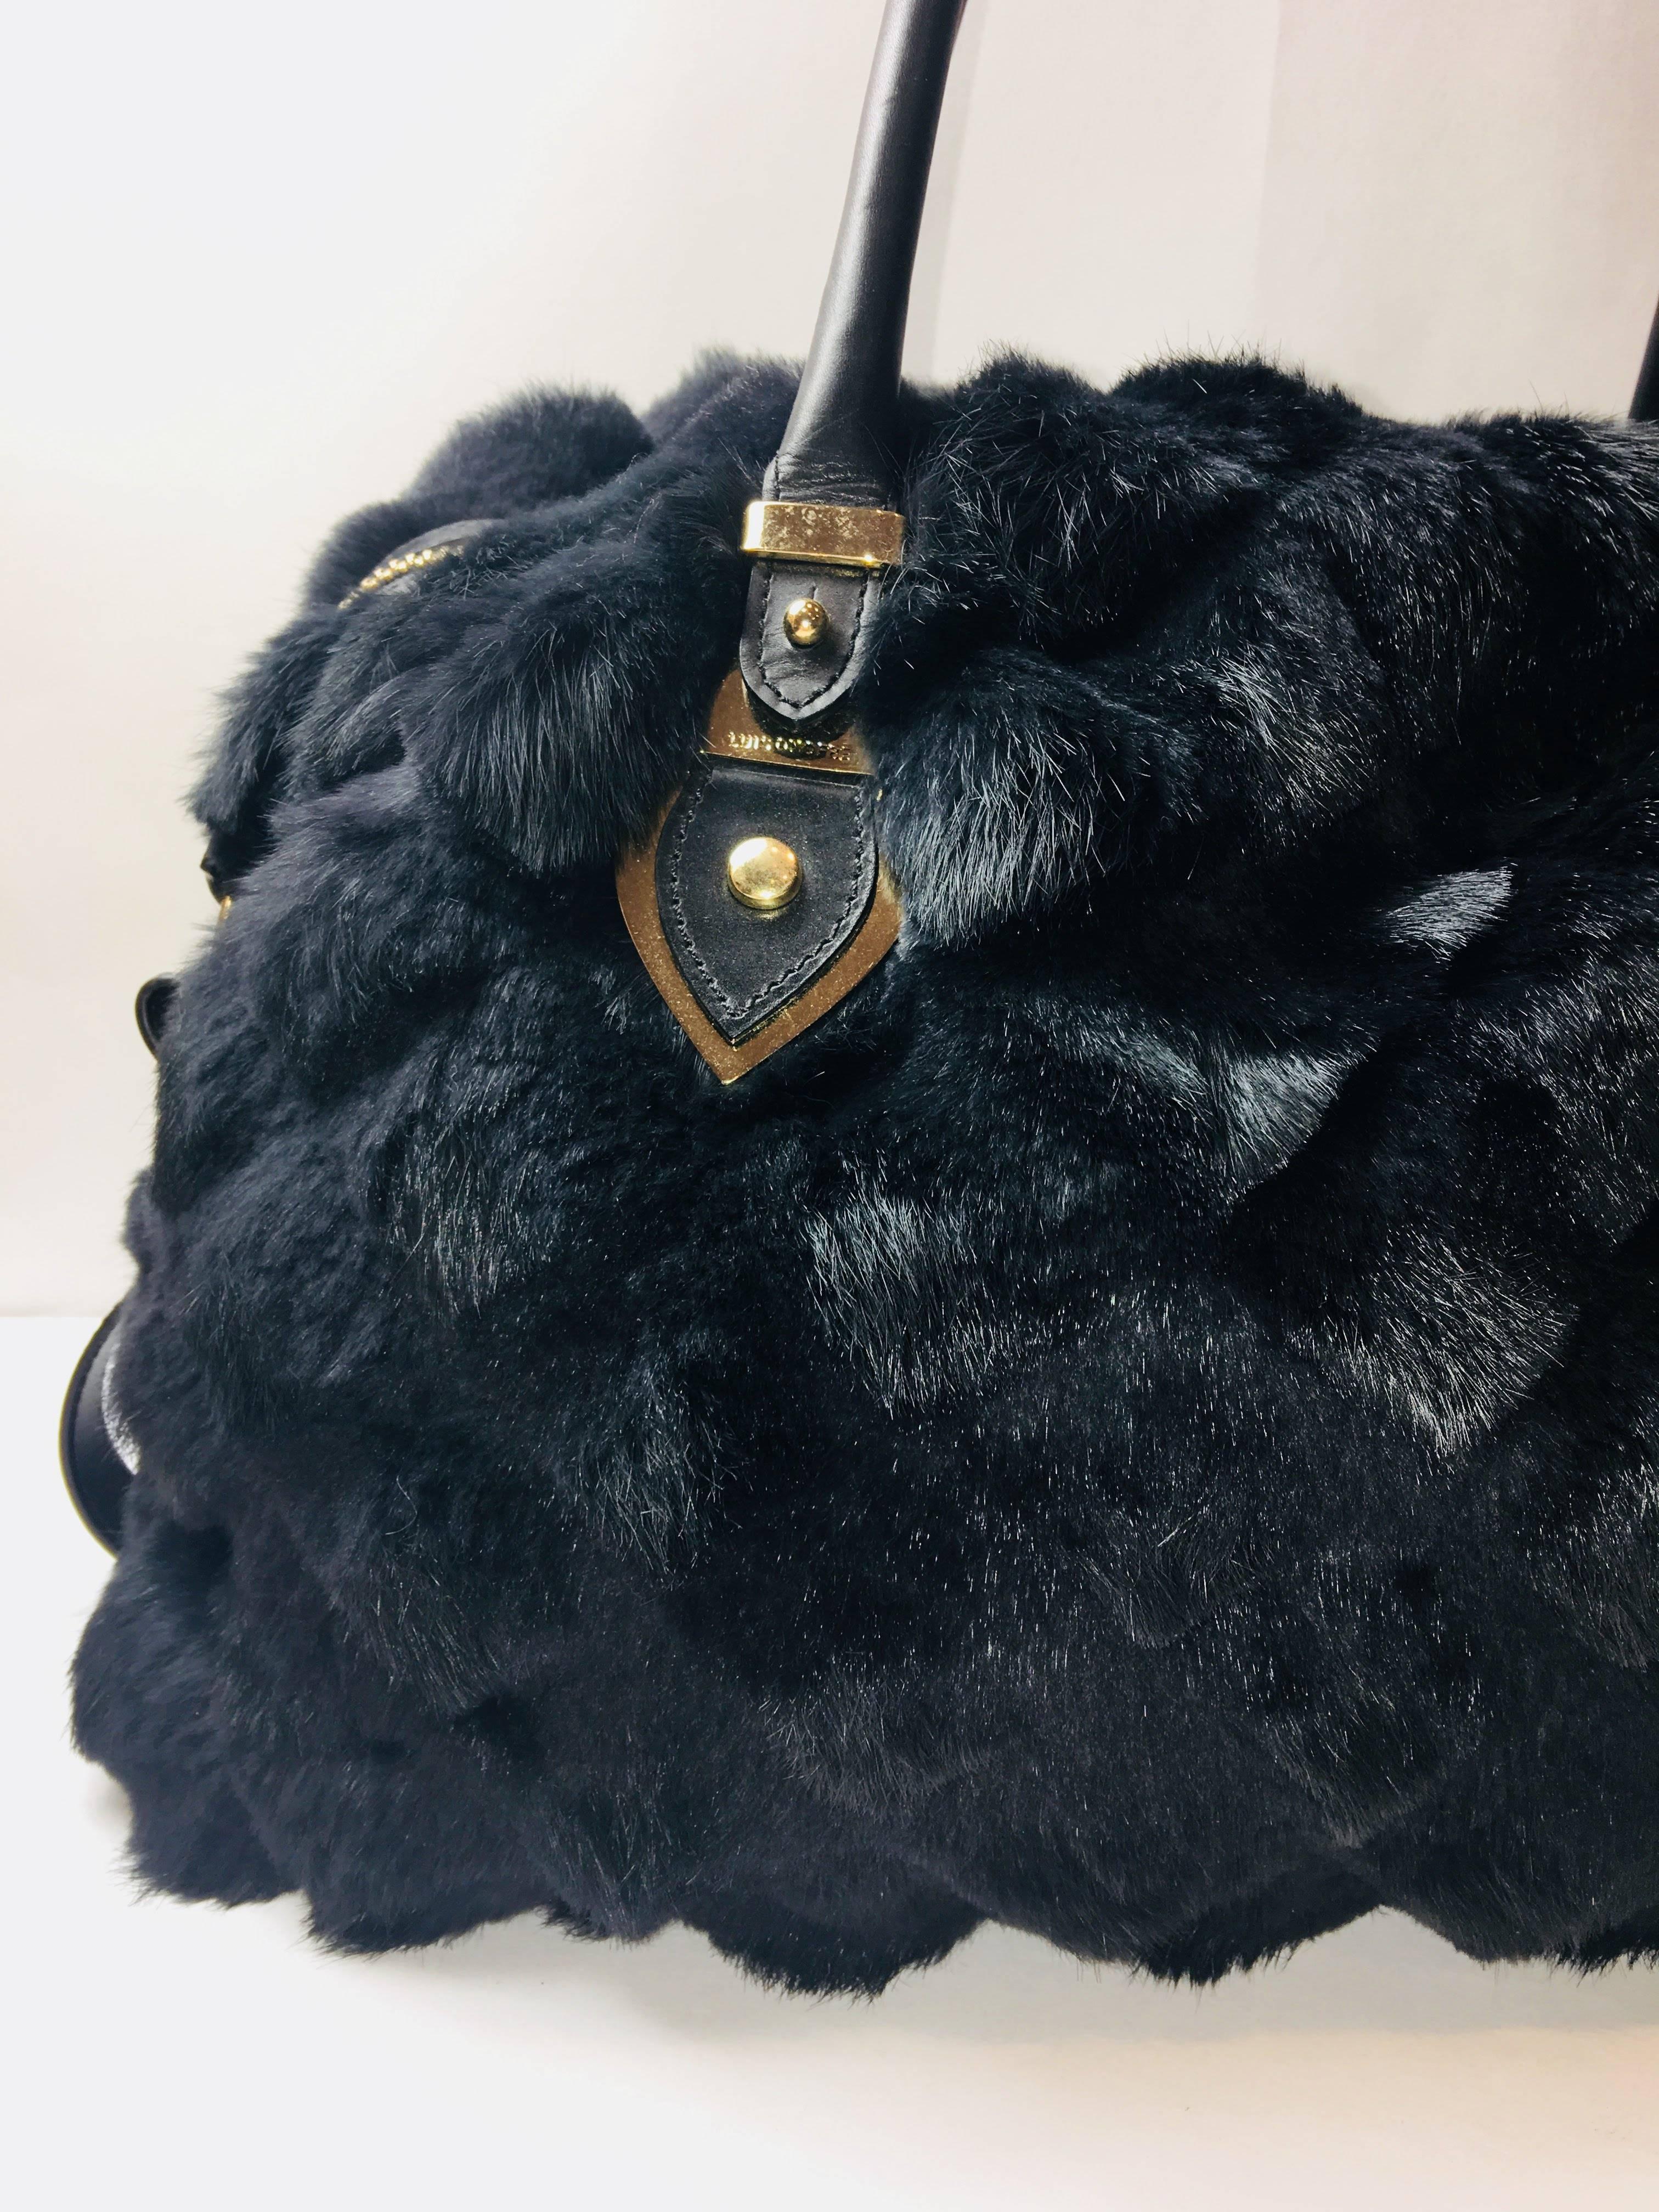 Luis Onofre Black Fur Satchel Limited Edition with Removable Strap